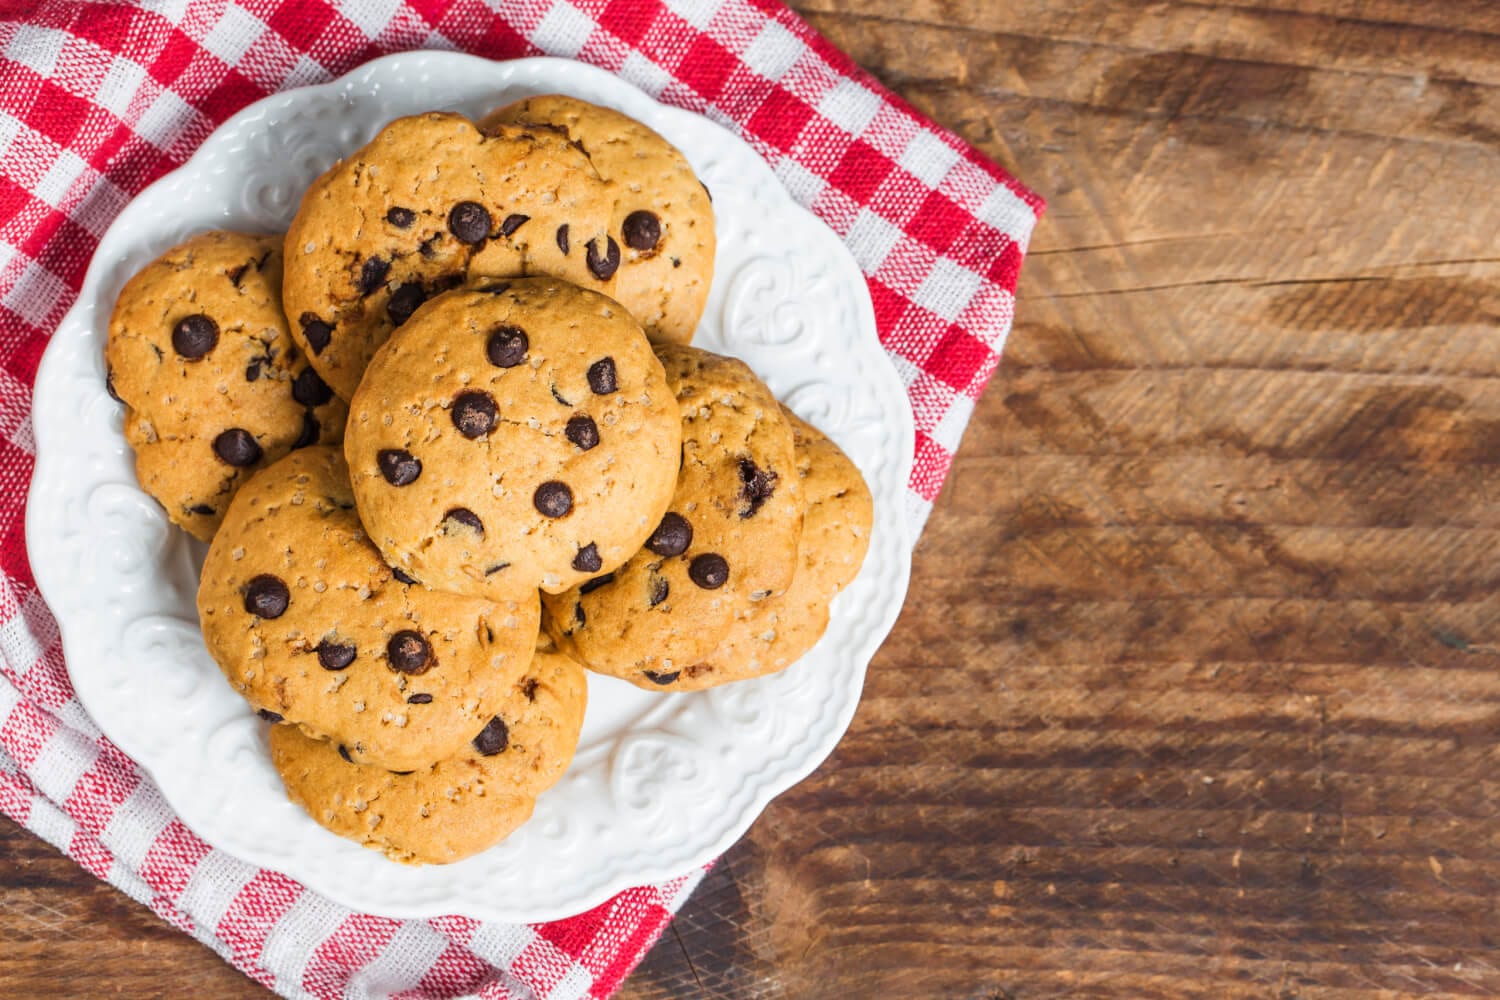 How to Make Your House Smell Like Cookies - Practical Perfection